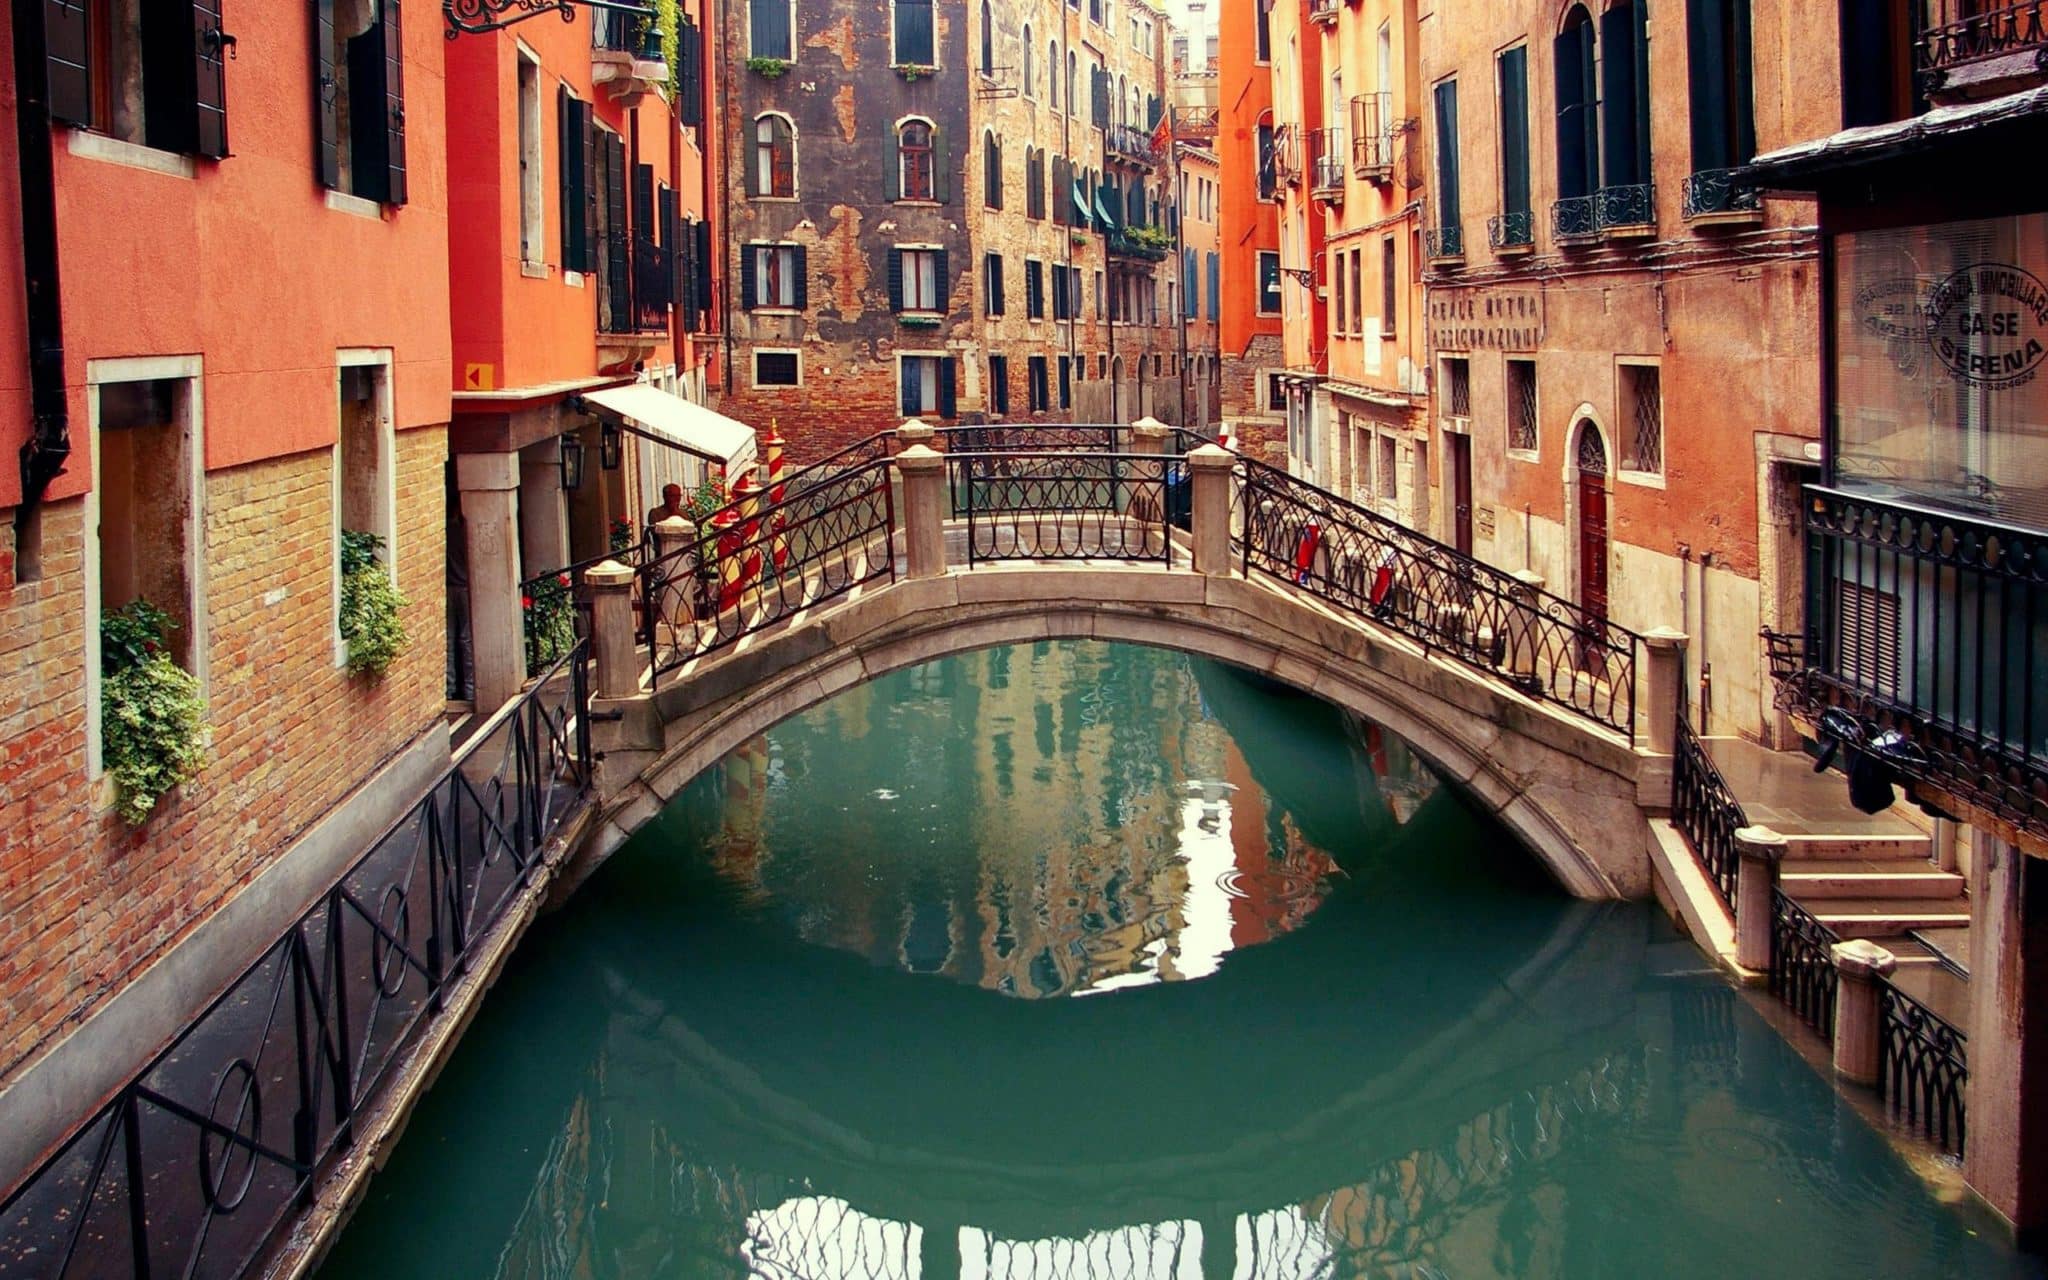 pris videnskabsmand Peck Top 10 Tourist Attractions in Venice Italy | Found The World